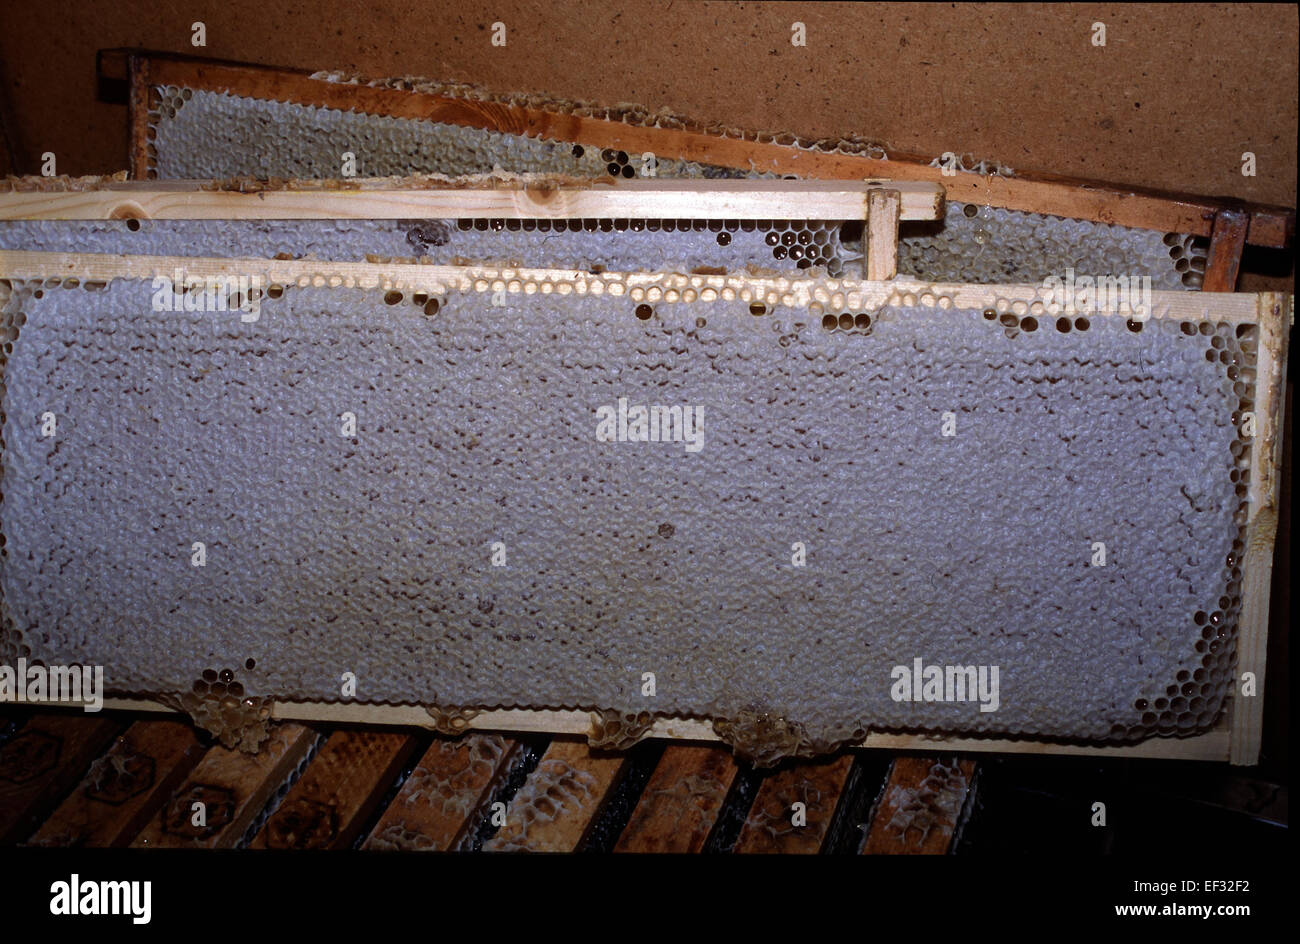 A capped honeycomb. Capped honey combs are an indication that the honey is ripe and can be harvested. Photo: Klaus Nowottnick Date: June 16, 2012 Stock Photo